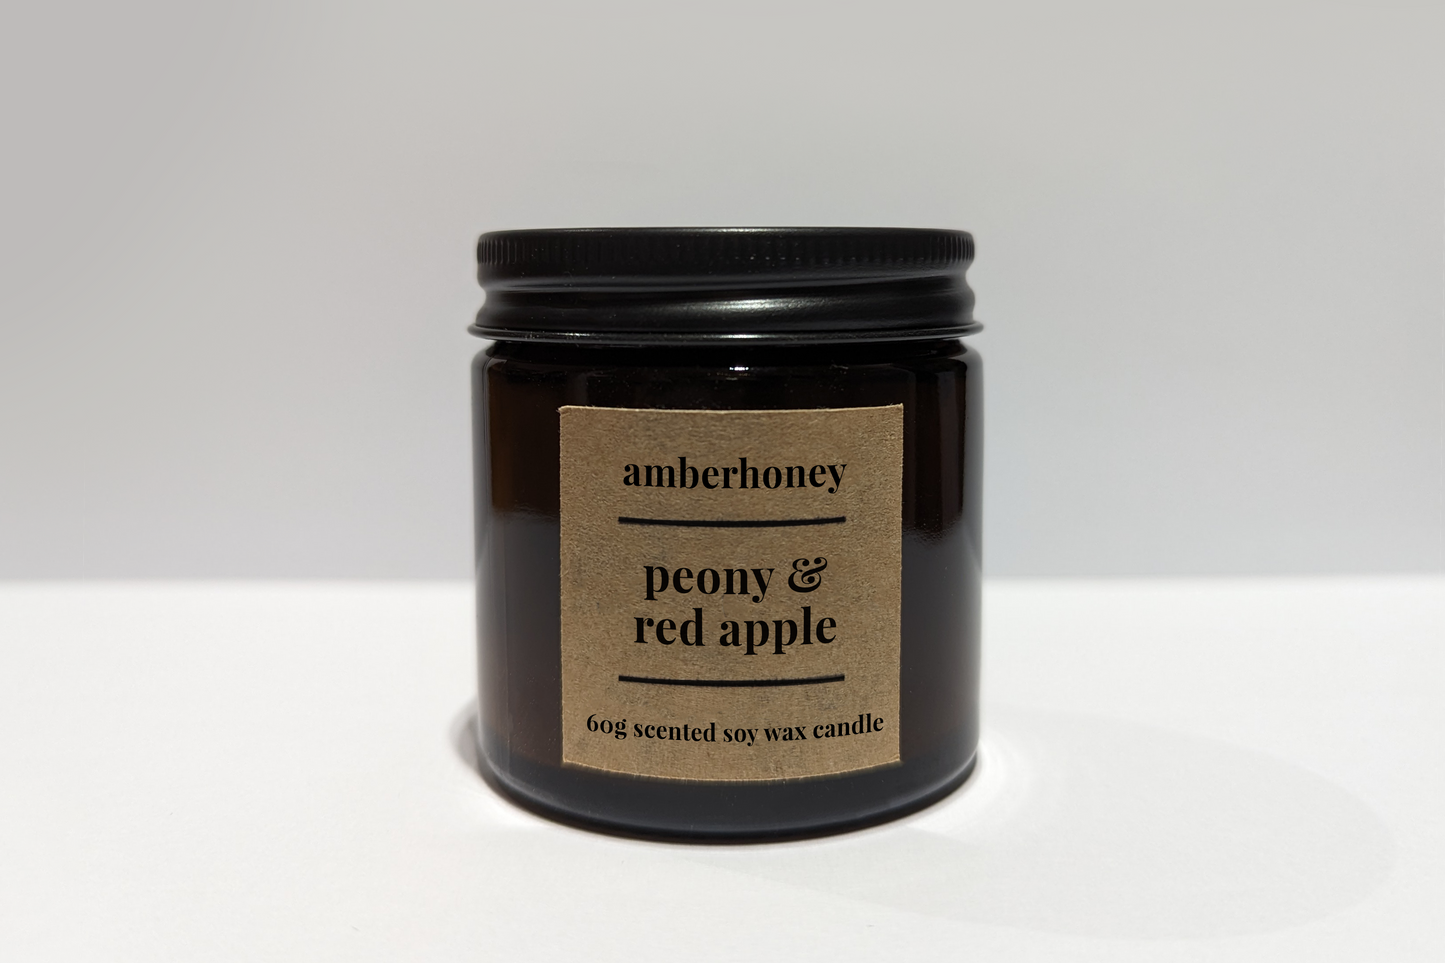 60g peony & red apple soy wax candle